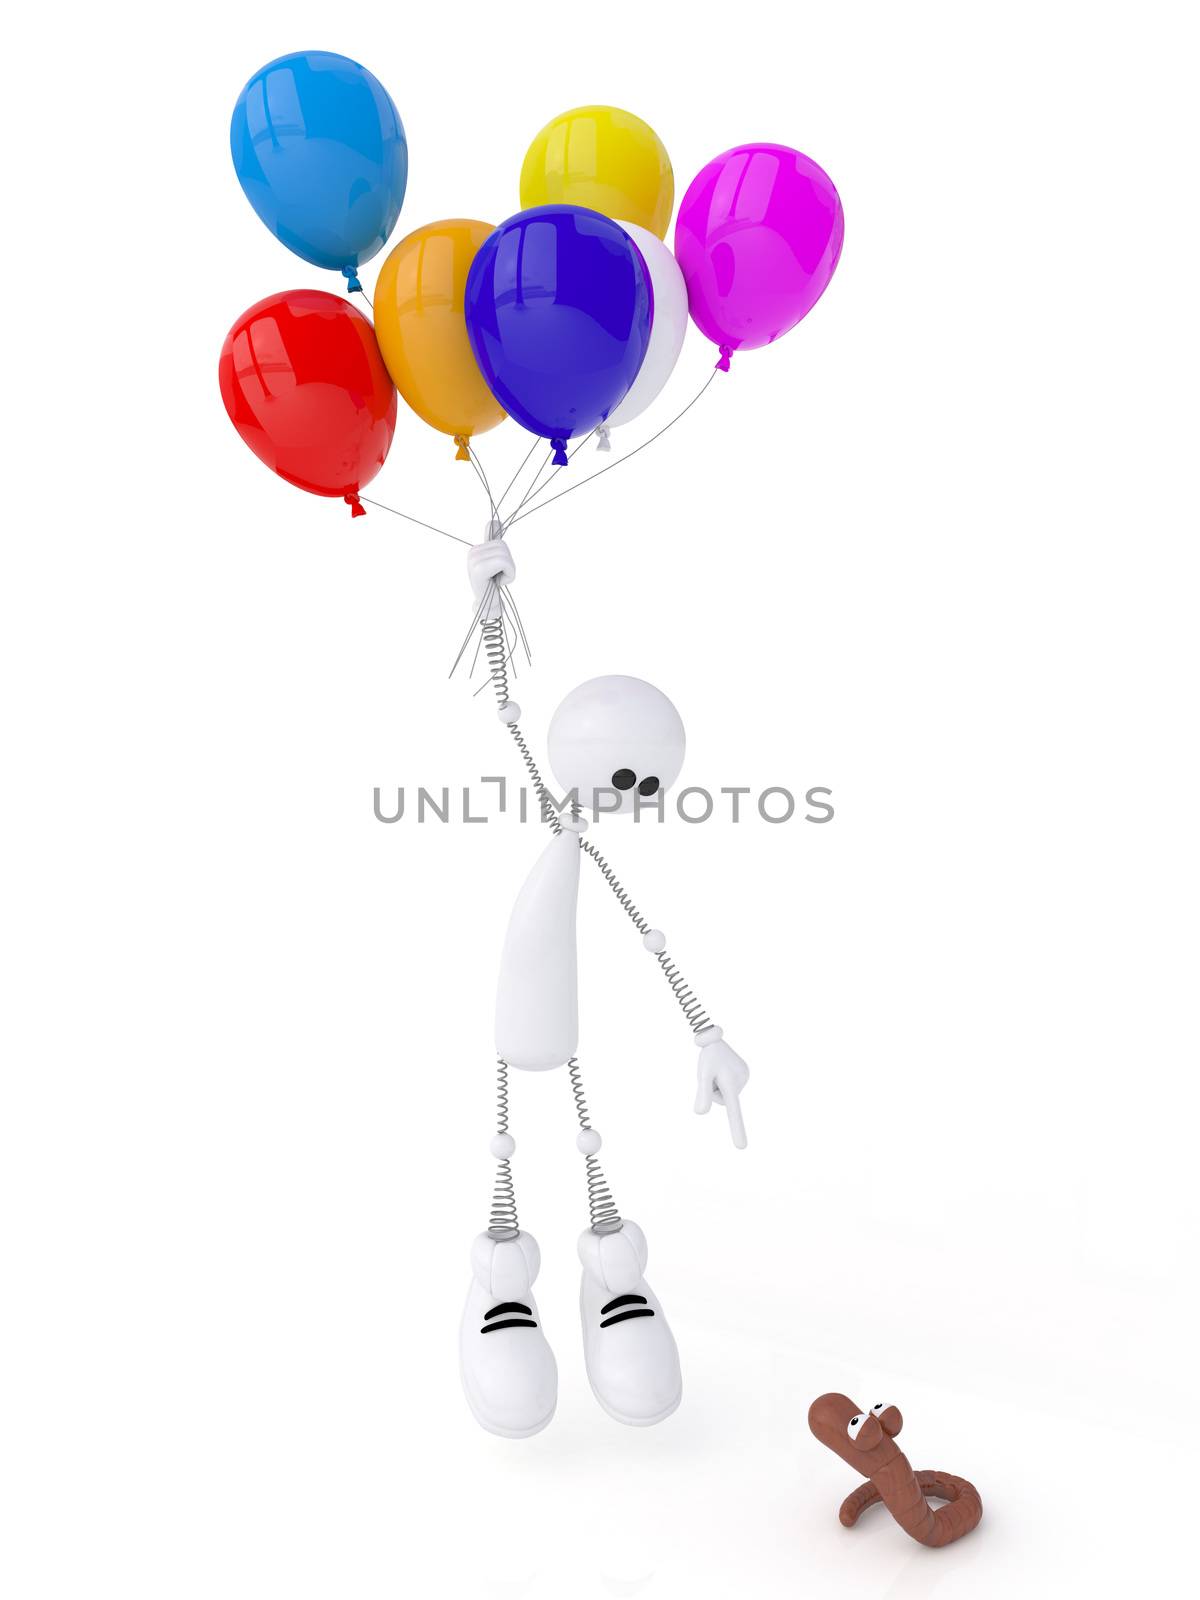 The white person on springs flies by balloons in clouds.